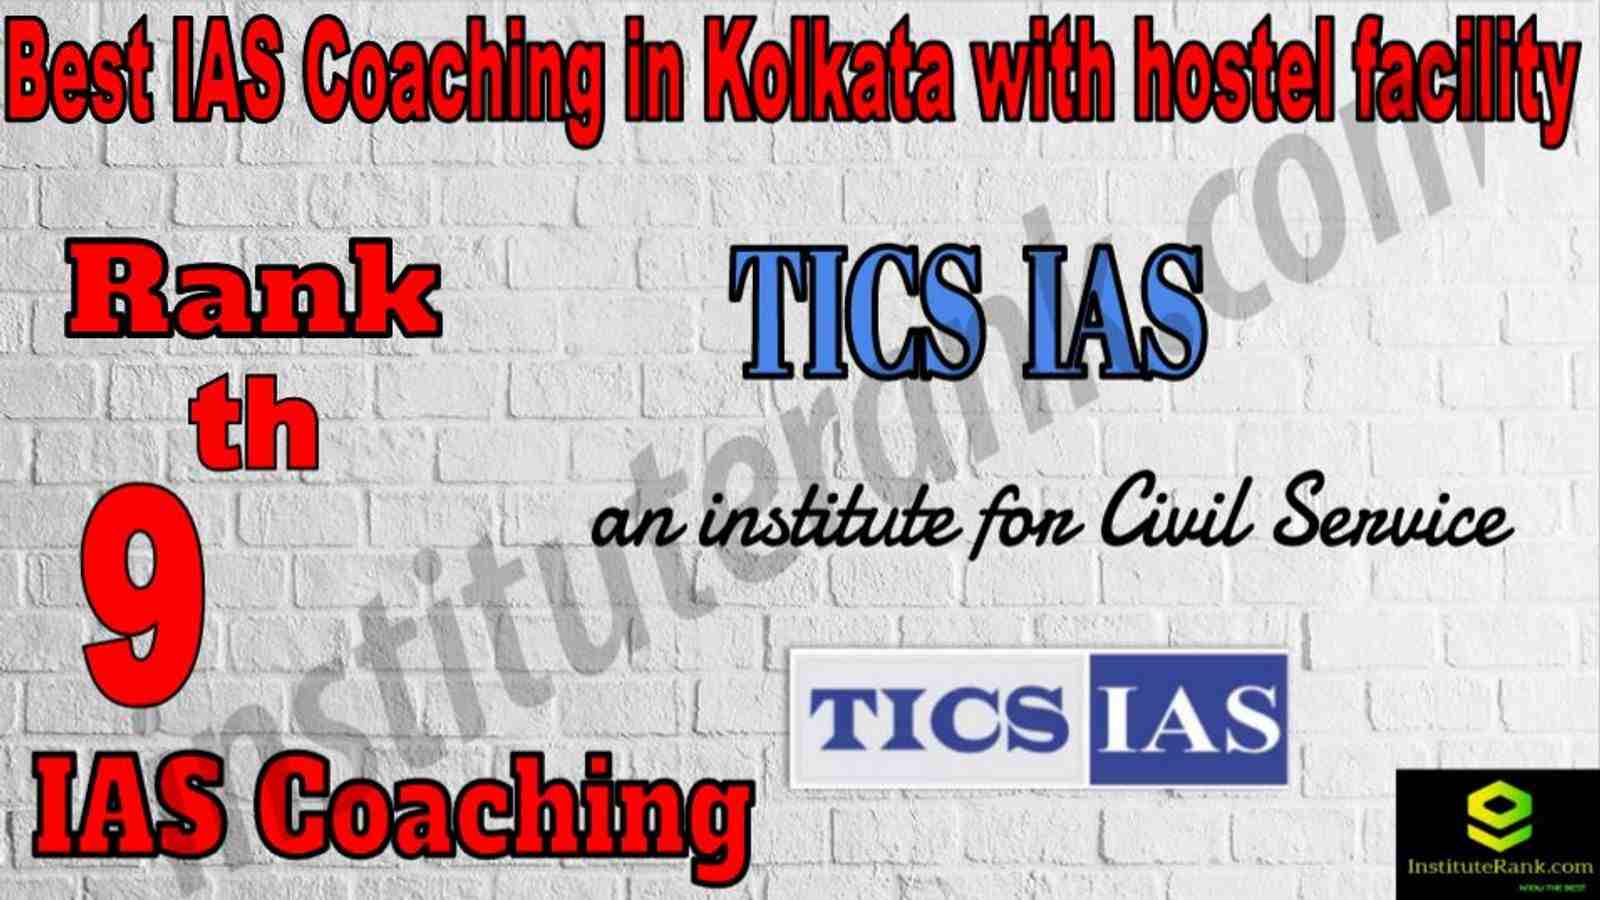 9th Best IAS Coaching in Kolkata with hostel facility